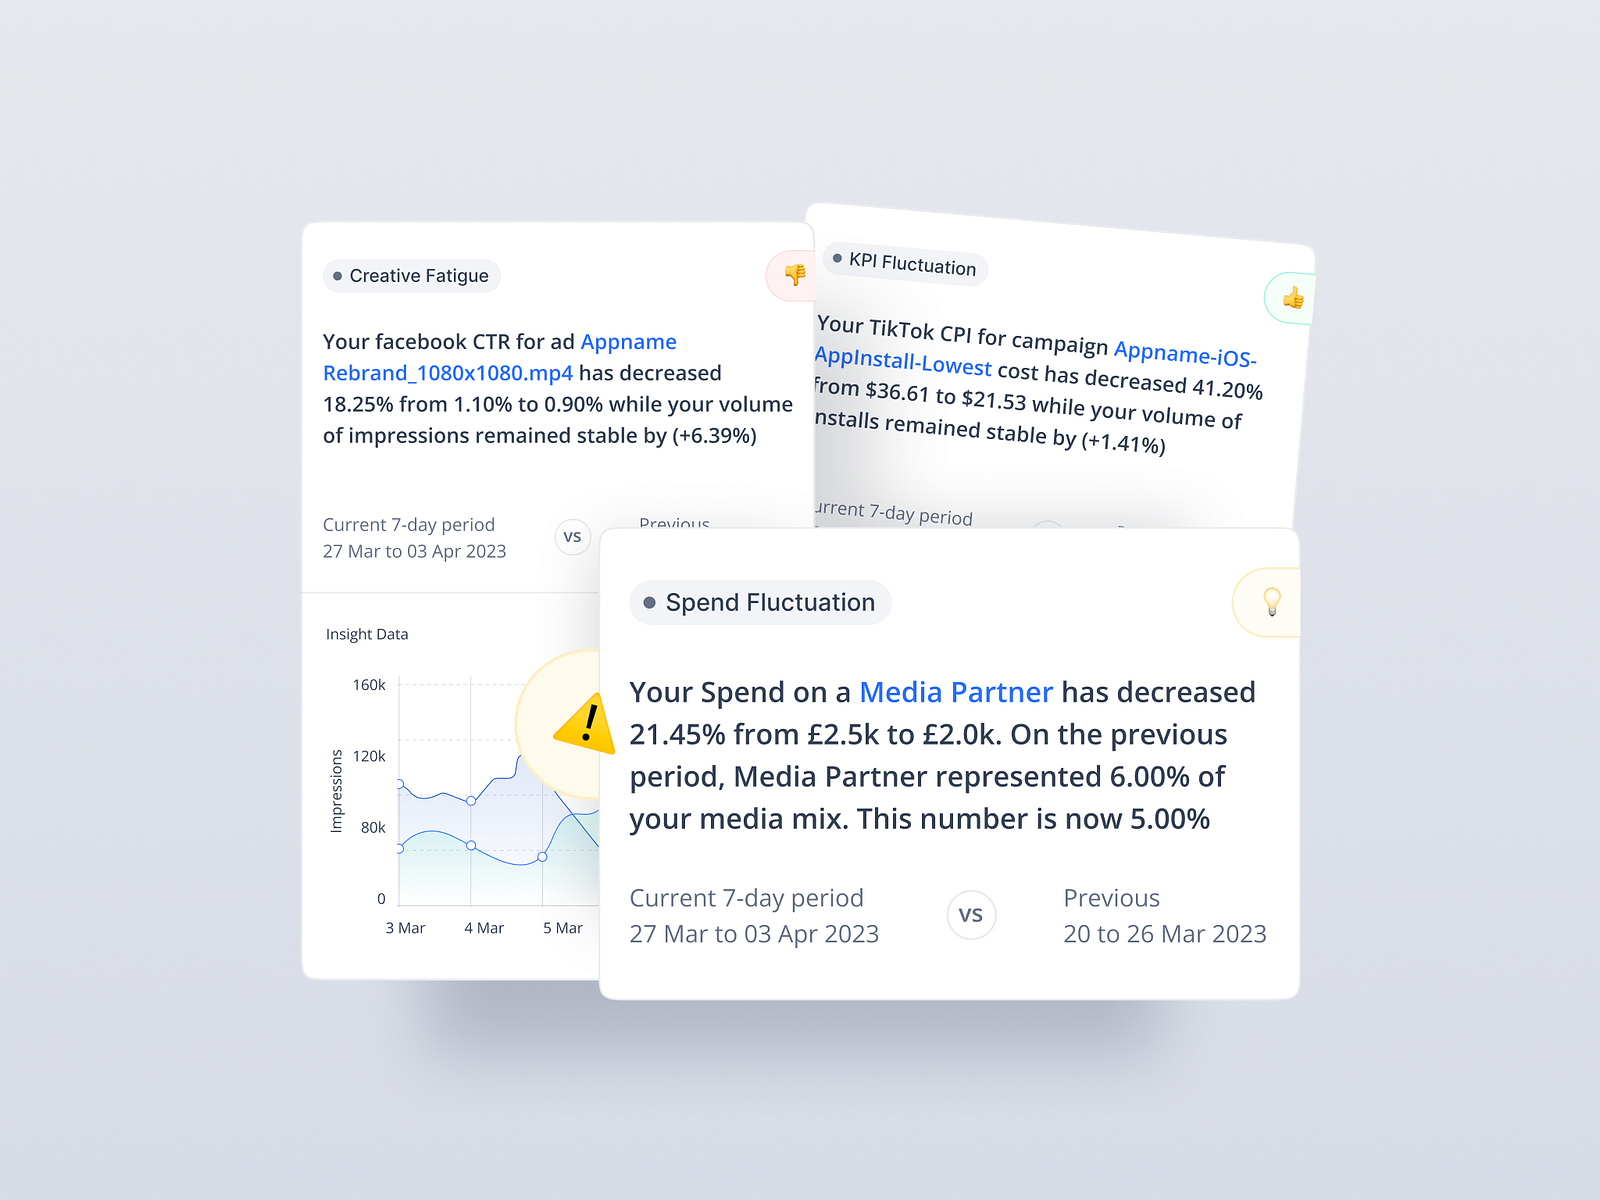 Card Component UI Design - Analytics by Parklins Ifeanyichukwu on Dribbble